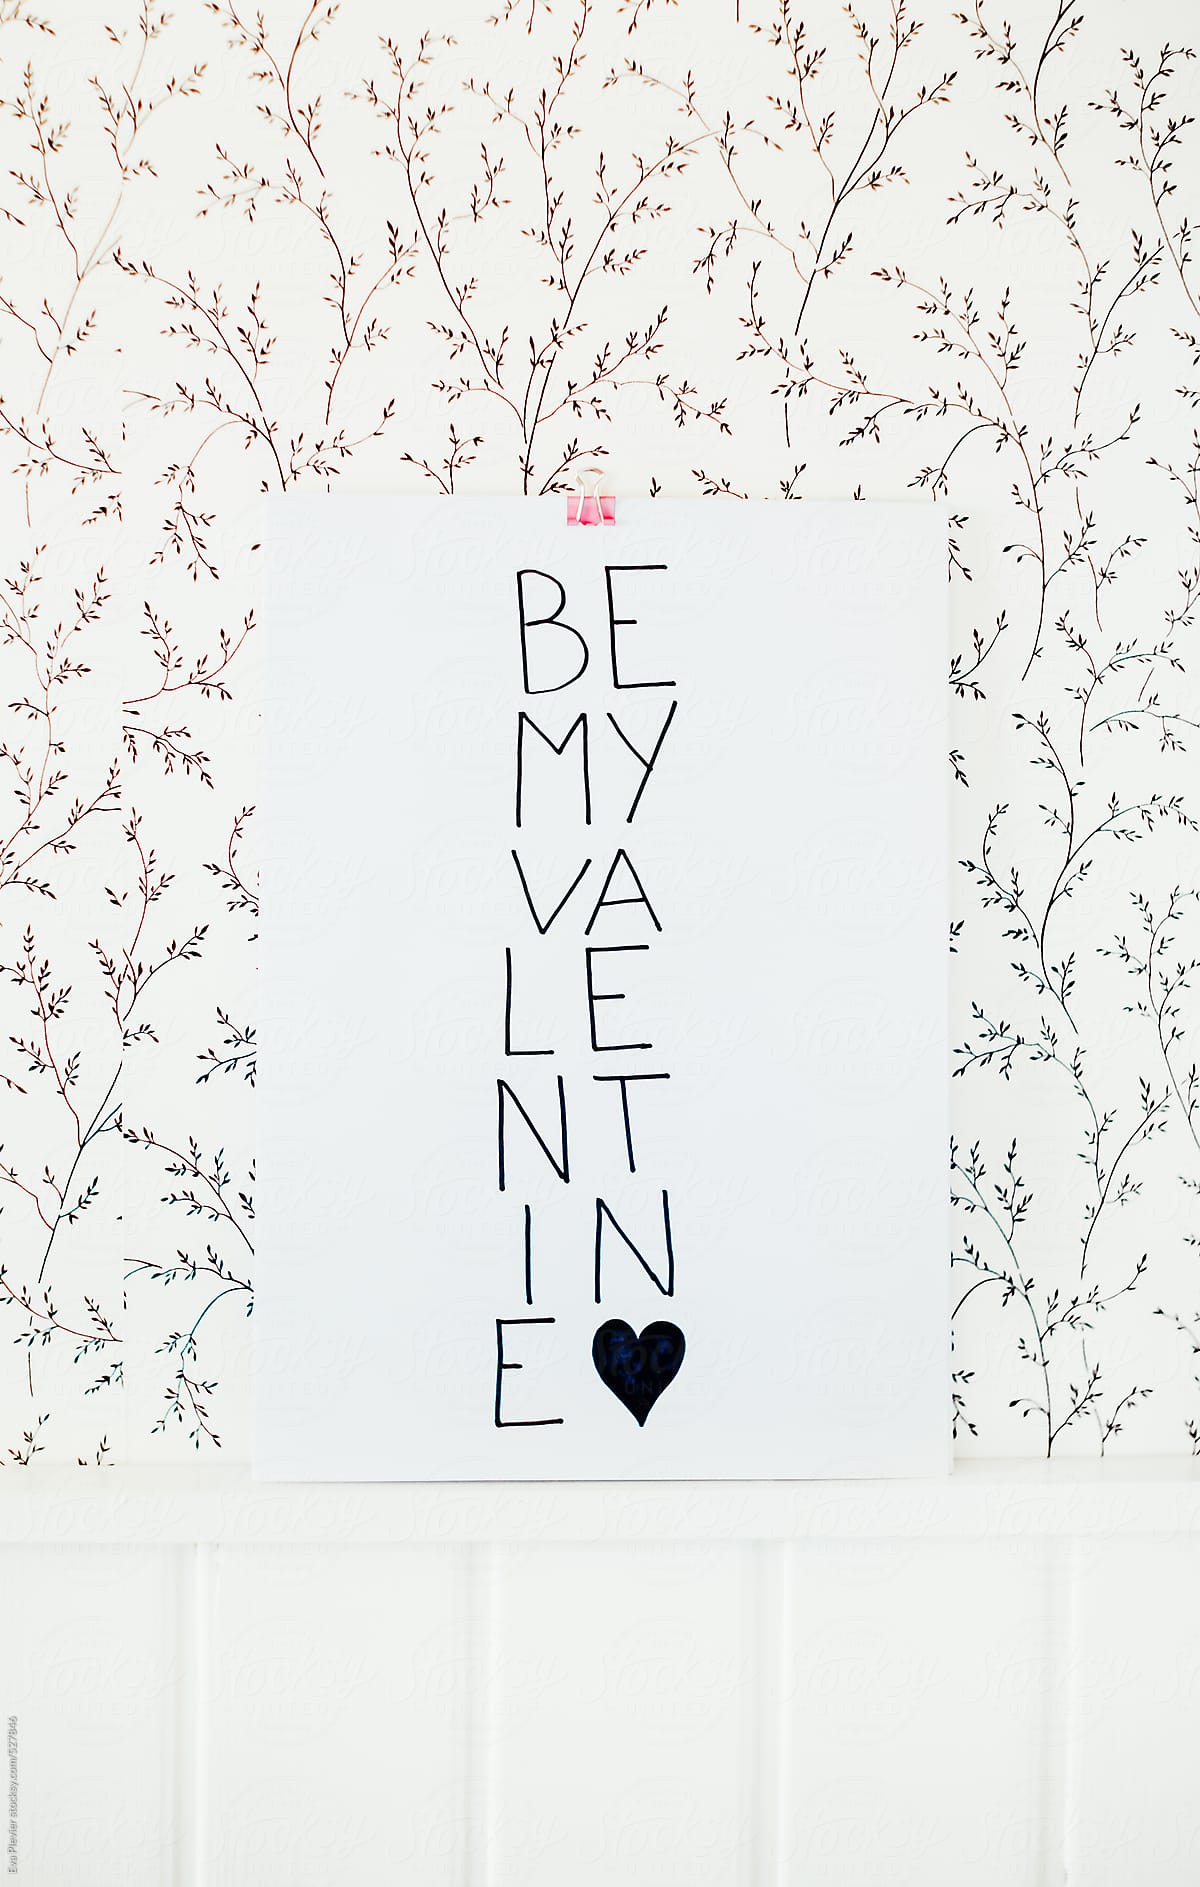 Be my valentine note hanging on the wall.